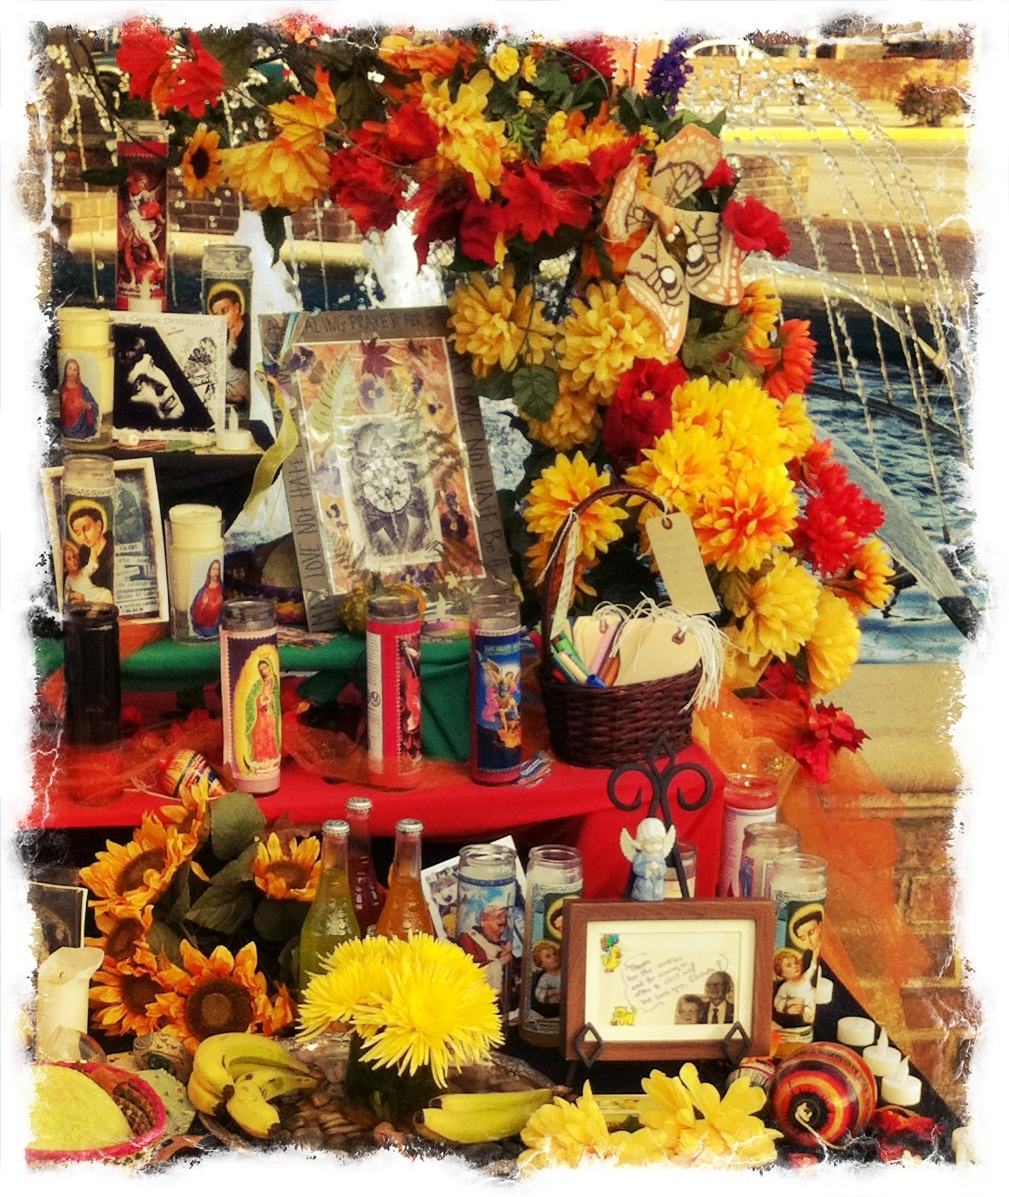 Vibrant colors, offerings to death invites the living to remember